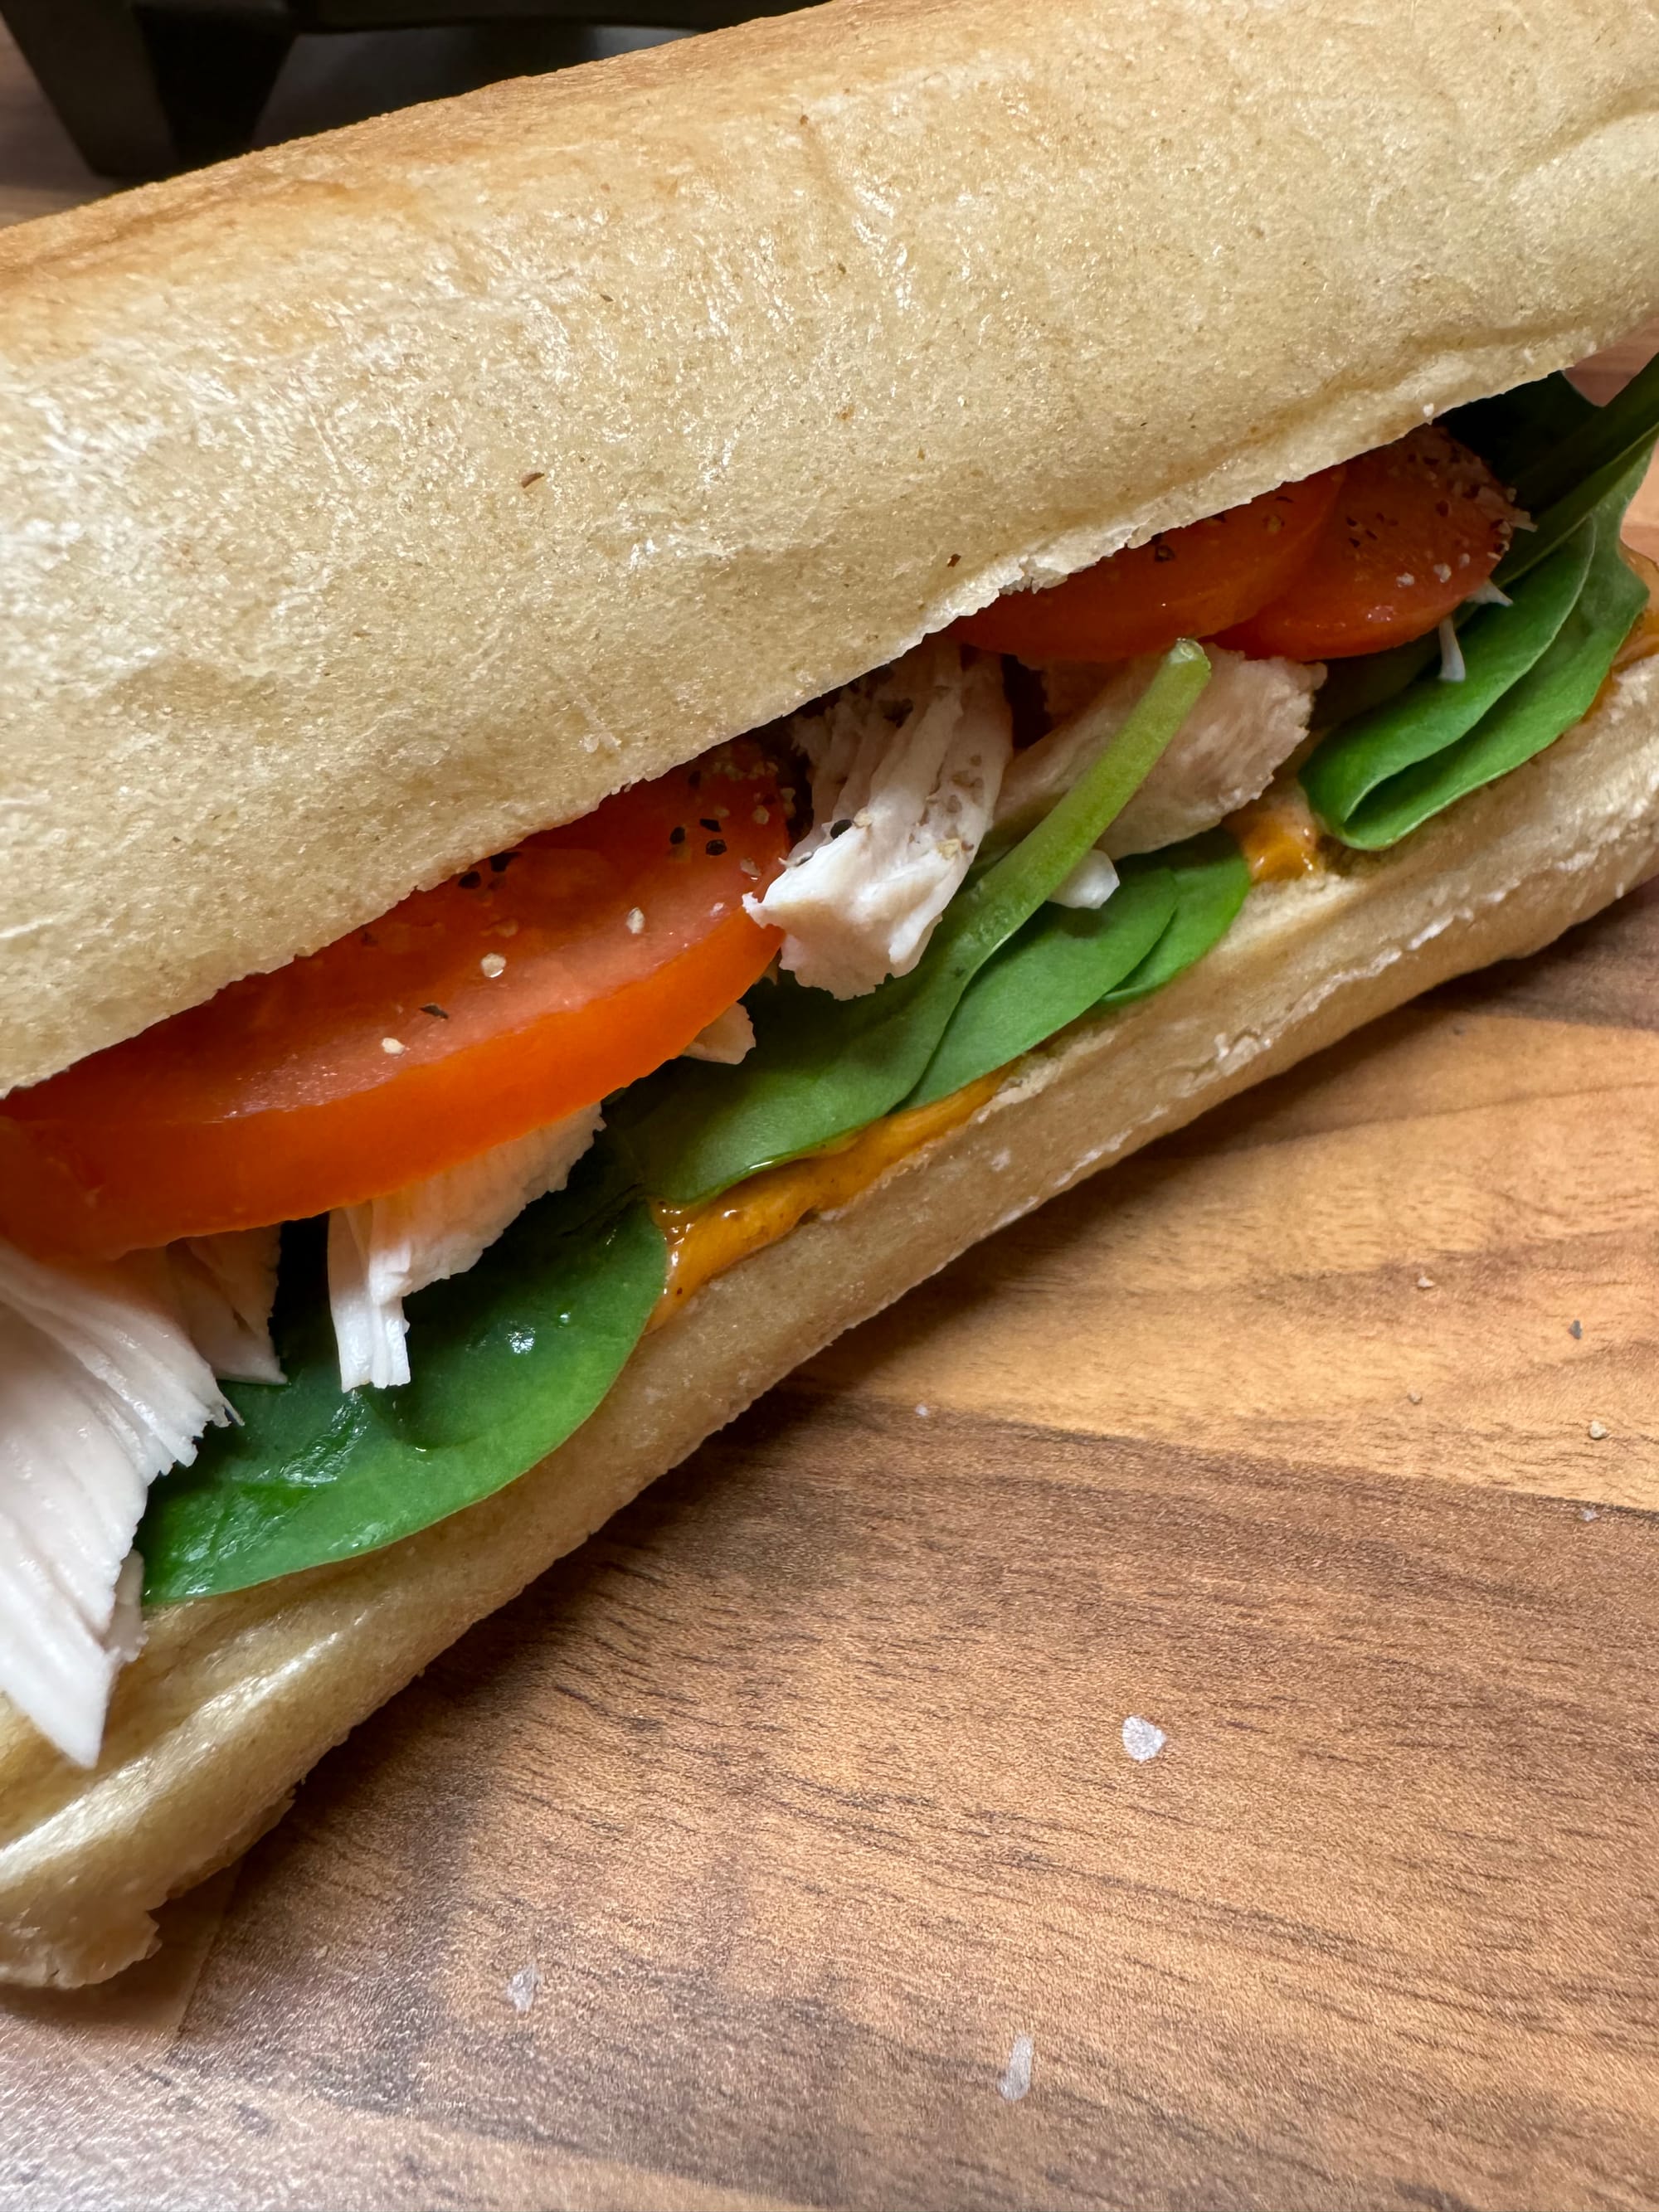 A delicious sandwich with juicy tomatoes and tender chicken, placed on a rustic wooden table.